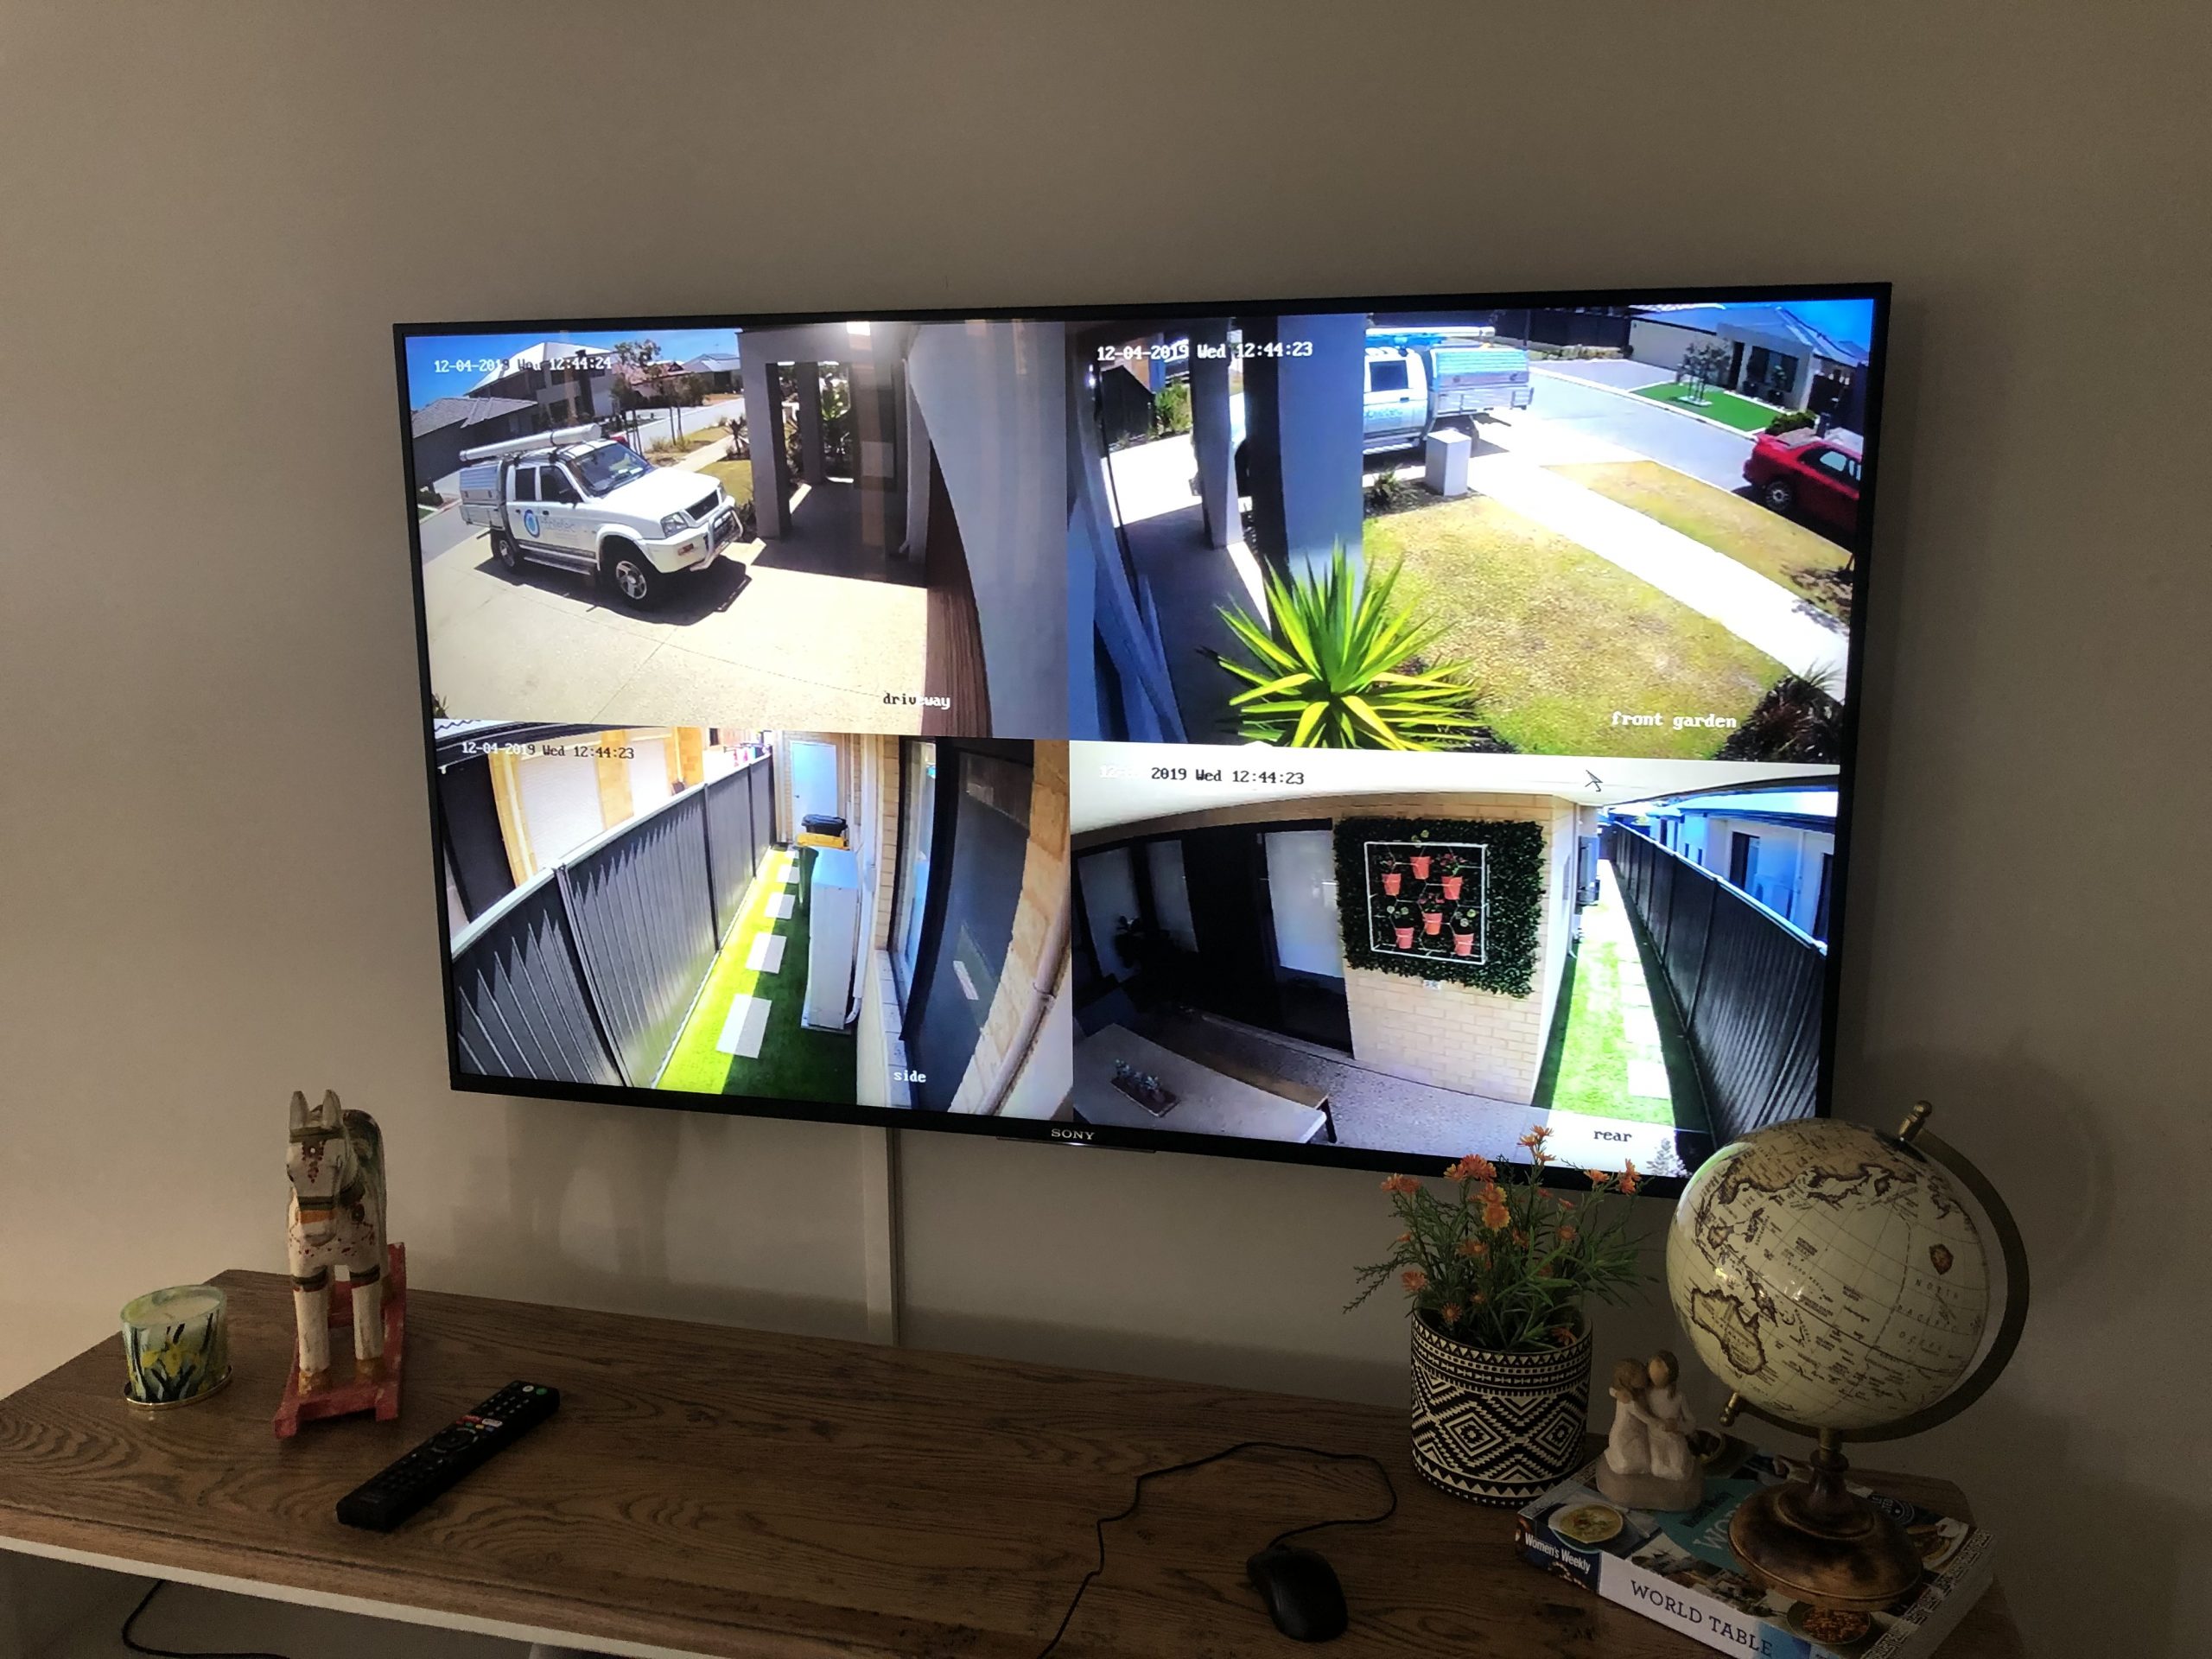 Security cameras installed in Perth and displayed on tv